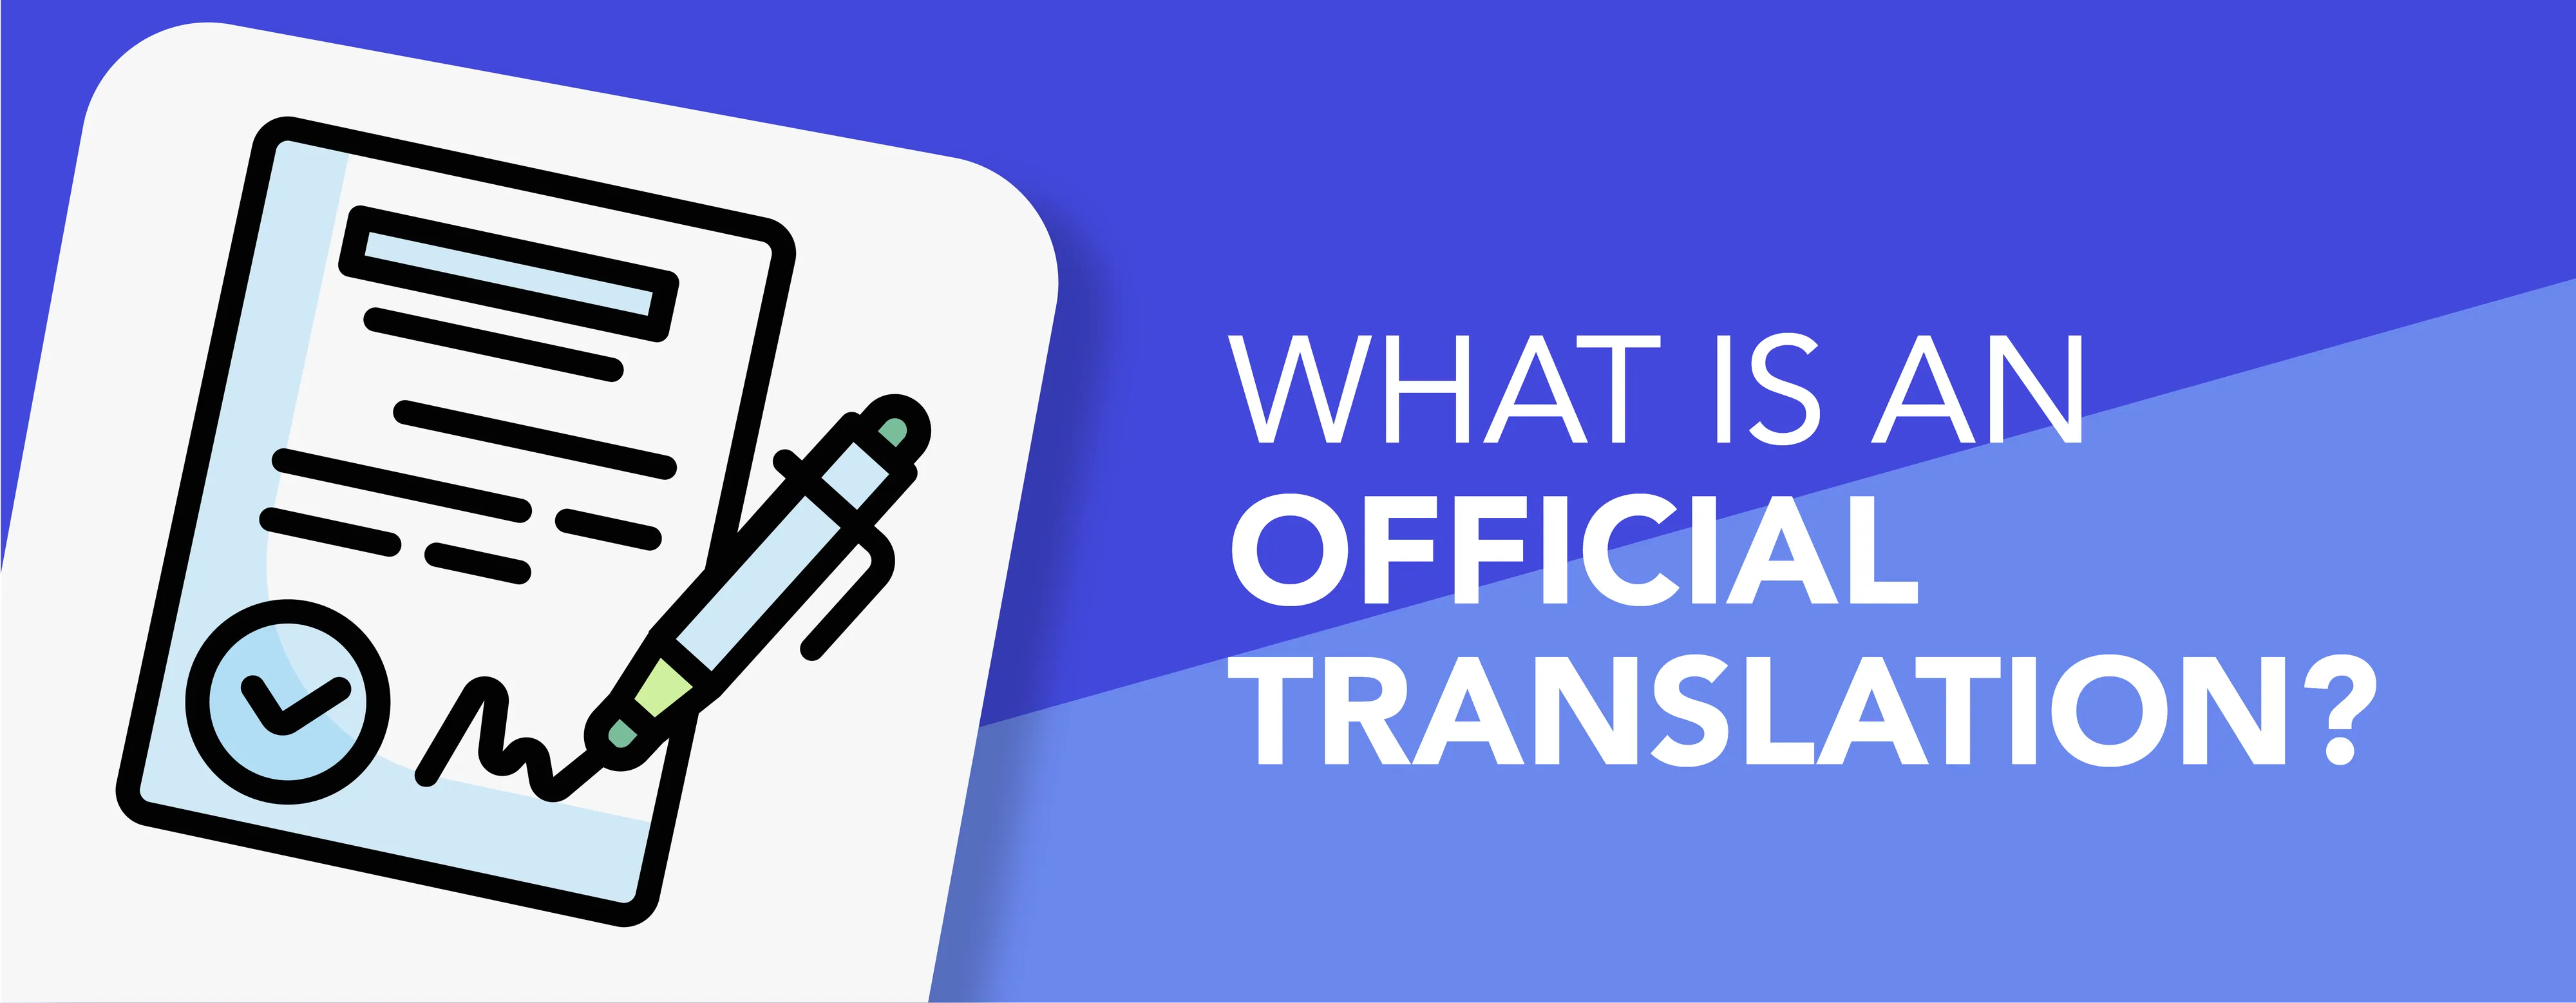 official translation services near me